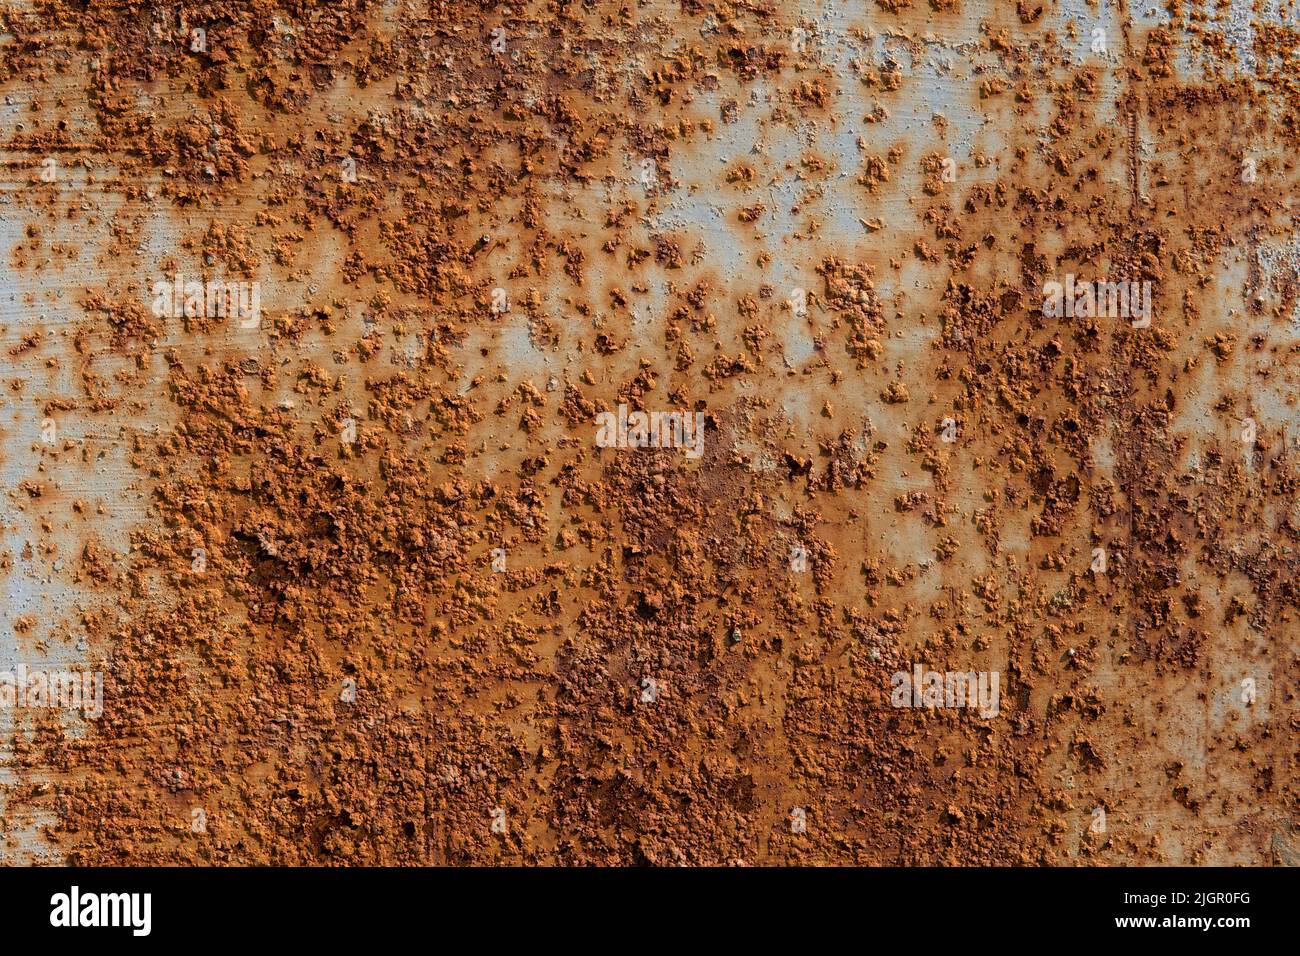 The rusty metal fence is covered with pimples. The aging process of iron. Metal oxidizes and corrodes. Process of degradation and decomposition. Rusty background. Rust texture Stock Photo